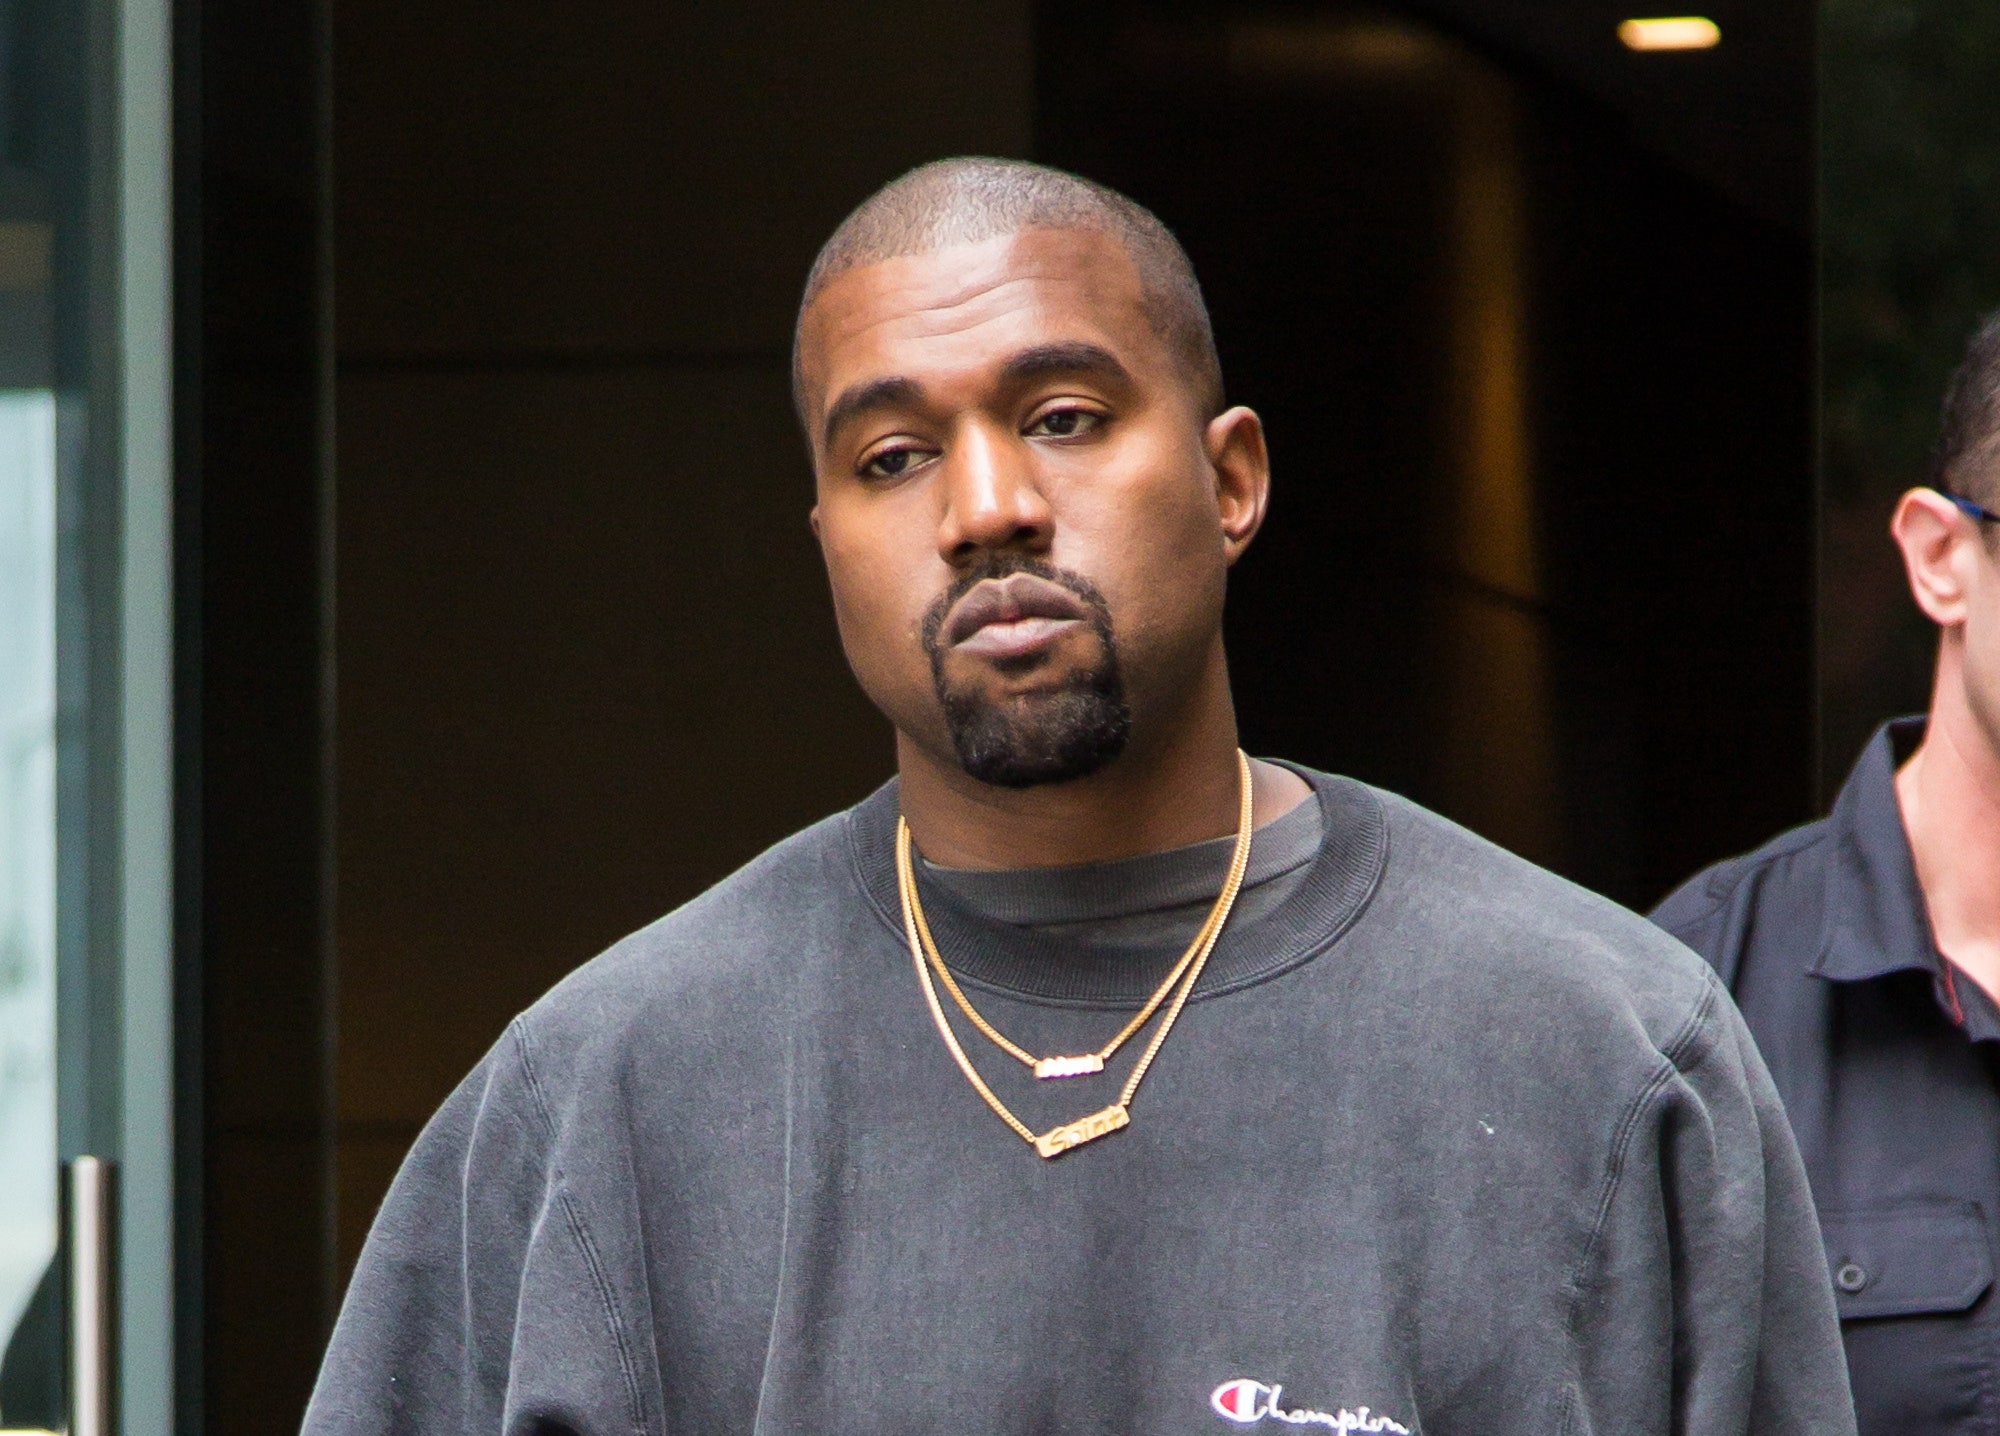 Kanye Gets Booted Out Of Skechers LA Office For 'Unauthorized Visit' After Adidas Rebuff